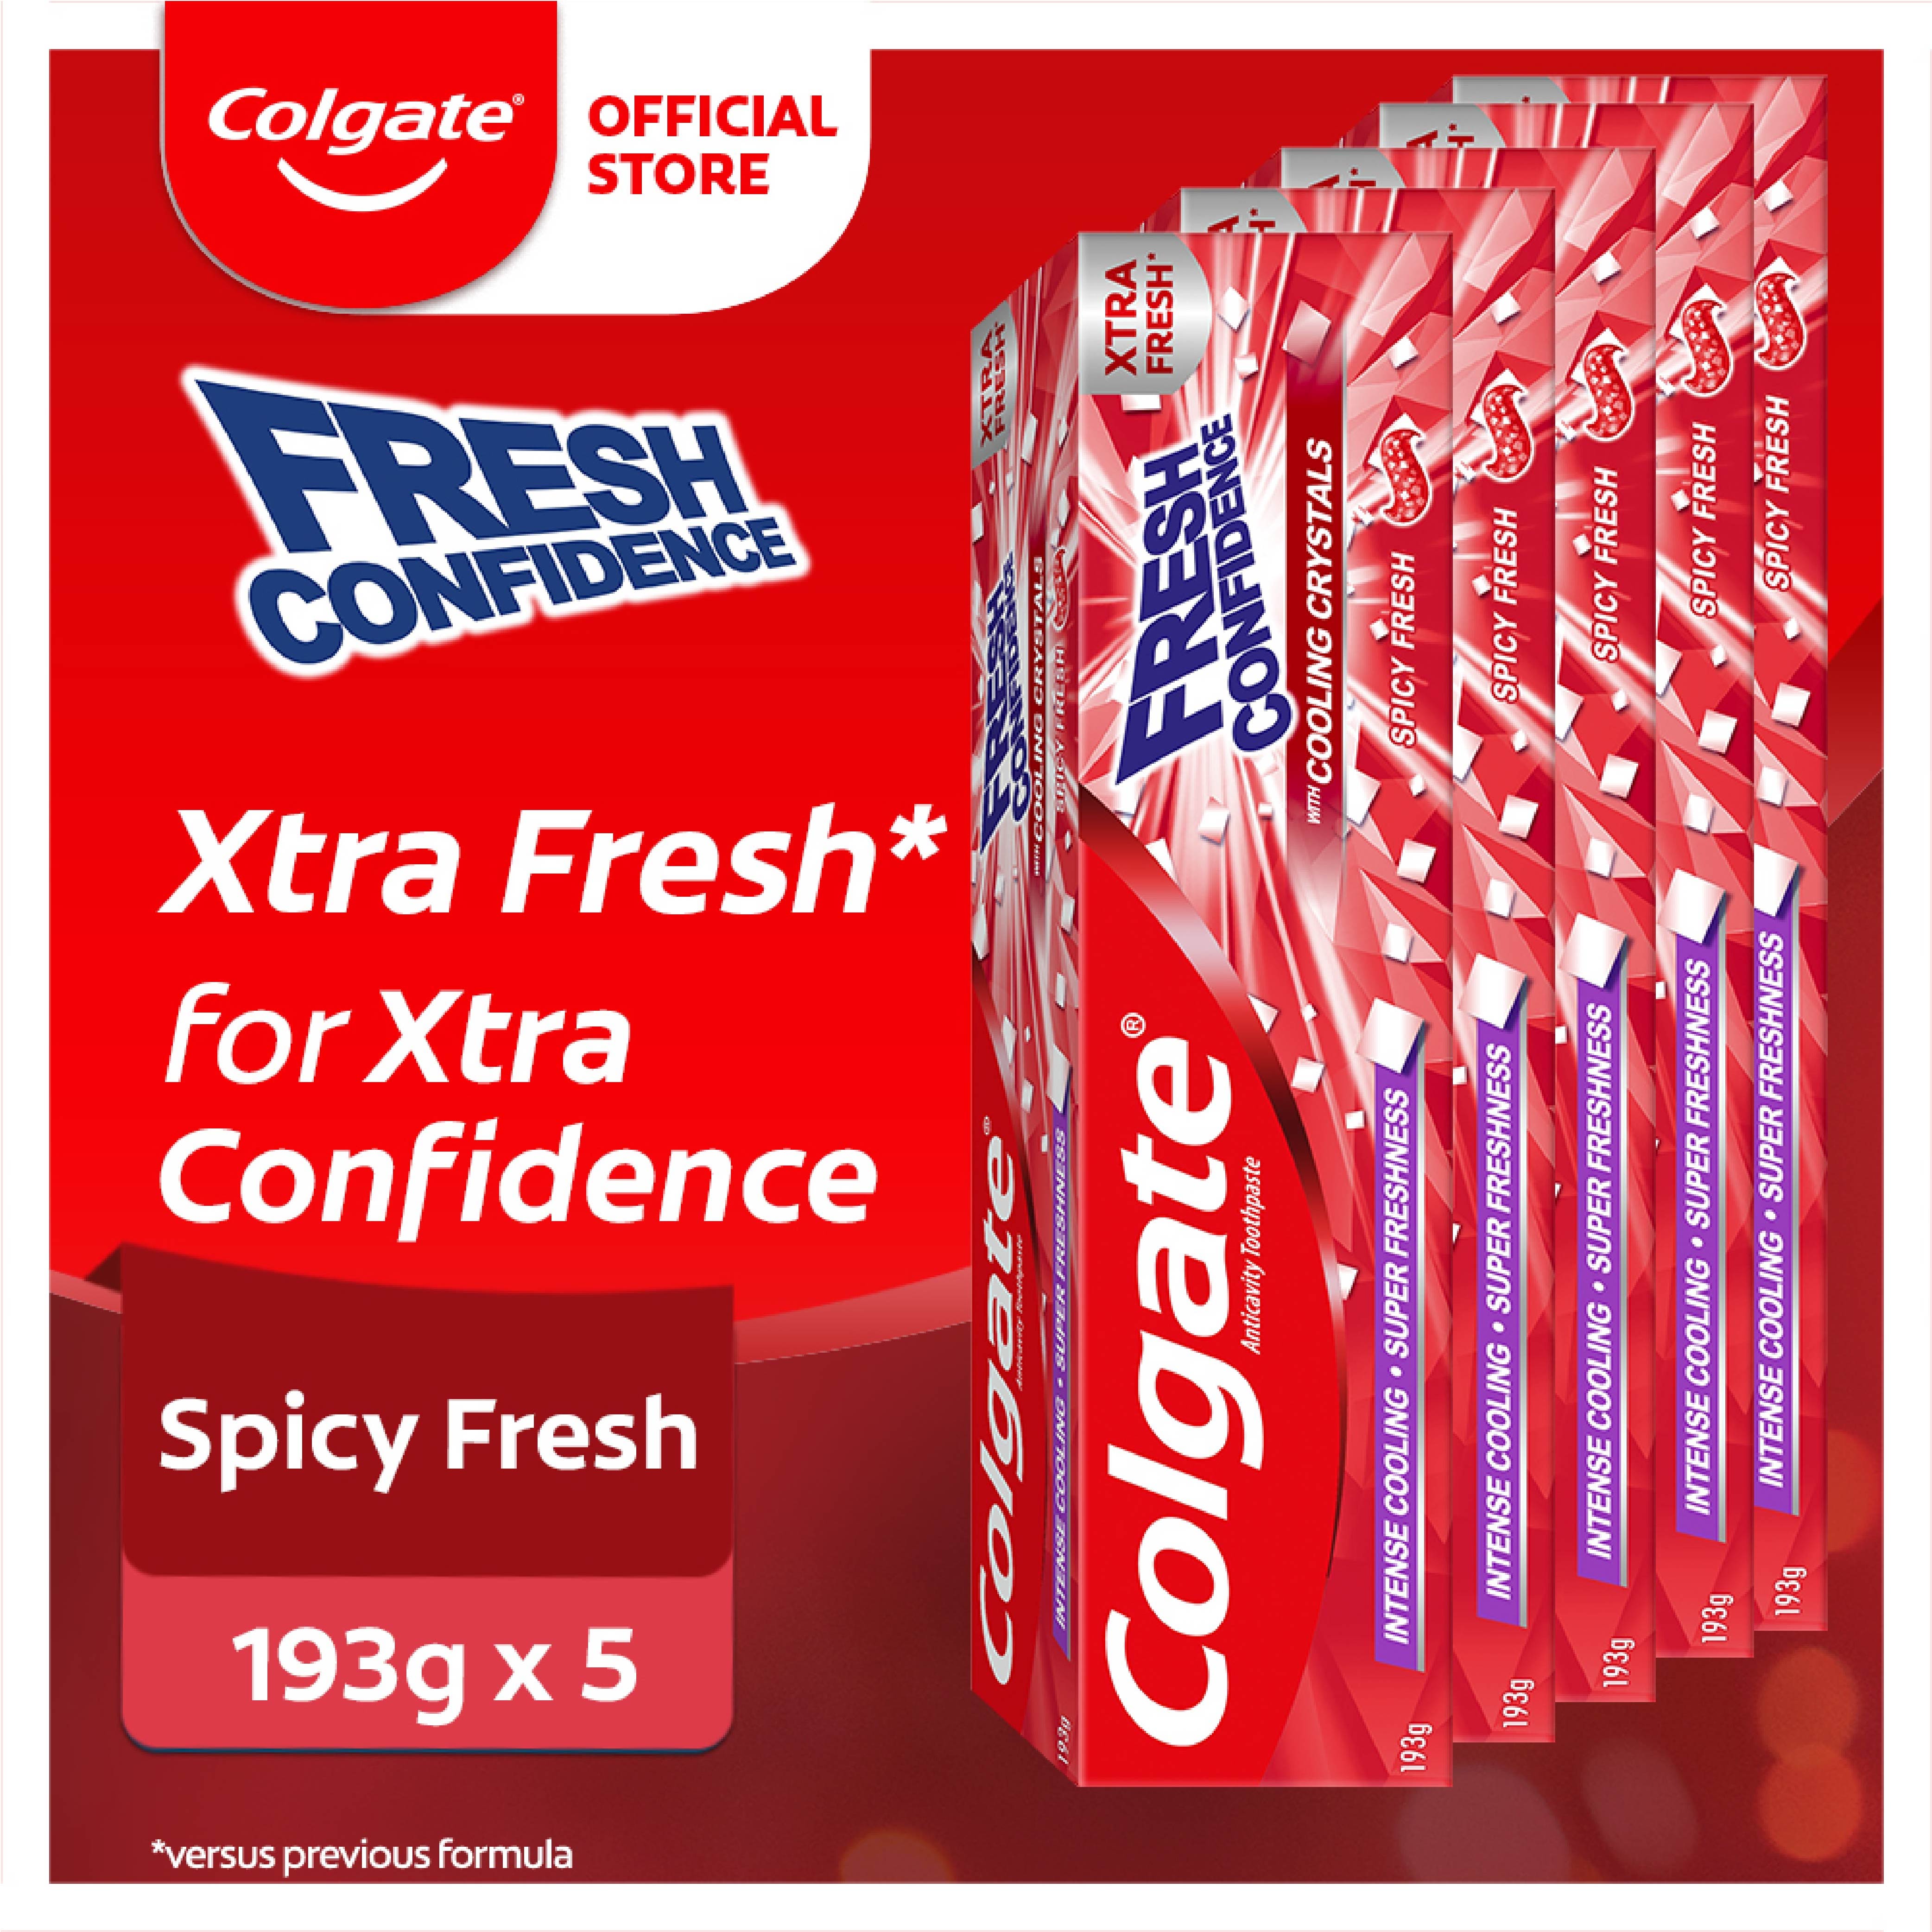 Lazada Philippines - Colgate Fresh Confidence Spicy Fresh Toothpaste for Fresh Breath 193g, Pack of 5